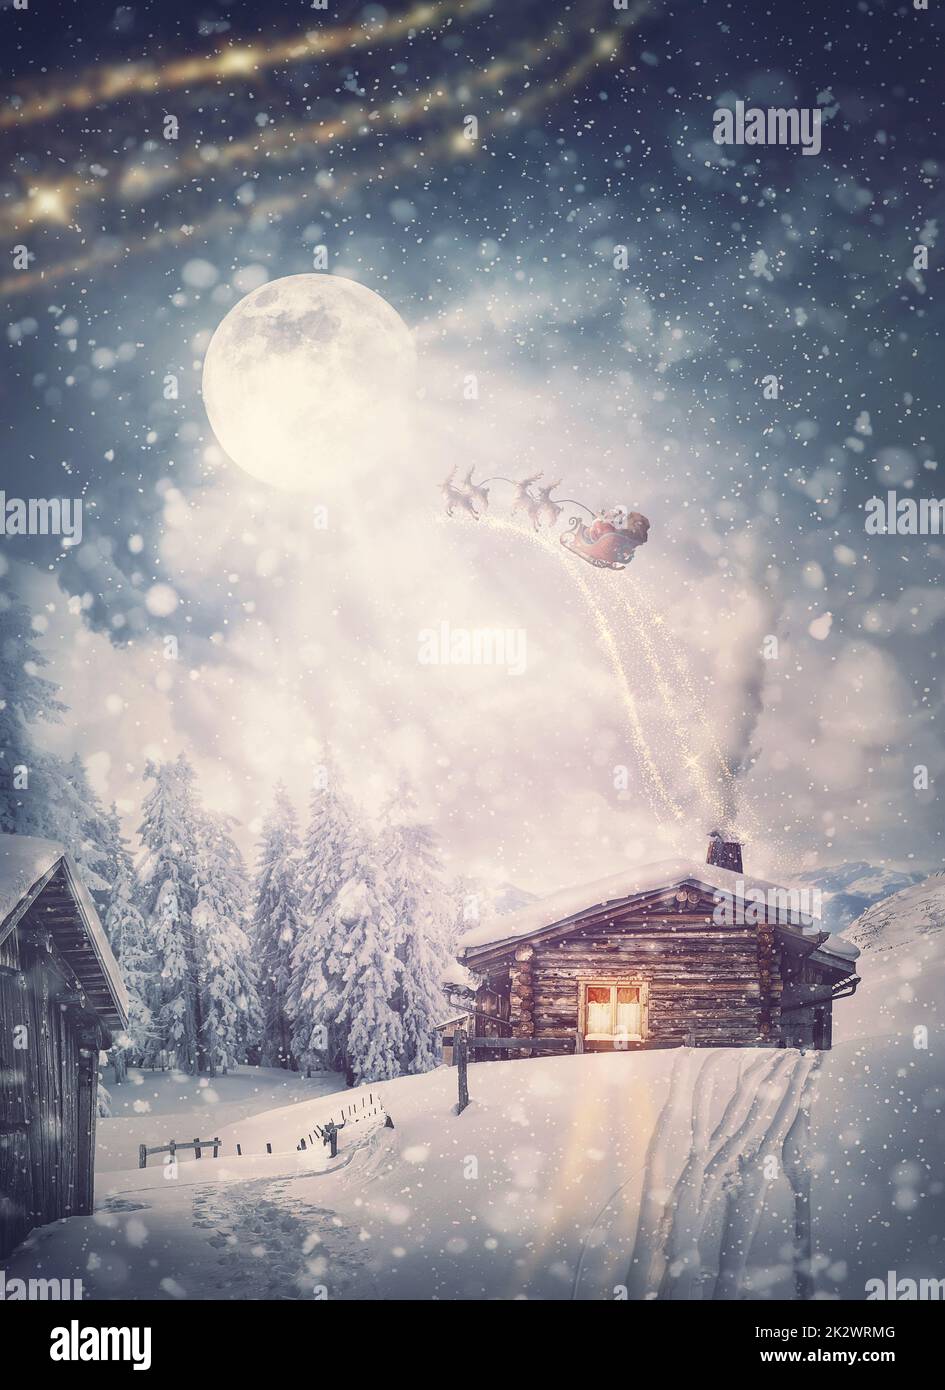 Magical holiday scene and Santa Claus sleigh with reindeers flying above the snowy house in the Christmas Eve. Wonderful snowflakes covering the villa Stock Photo